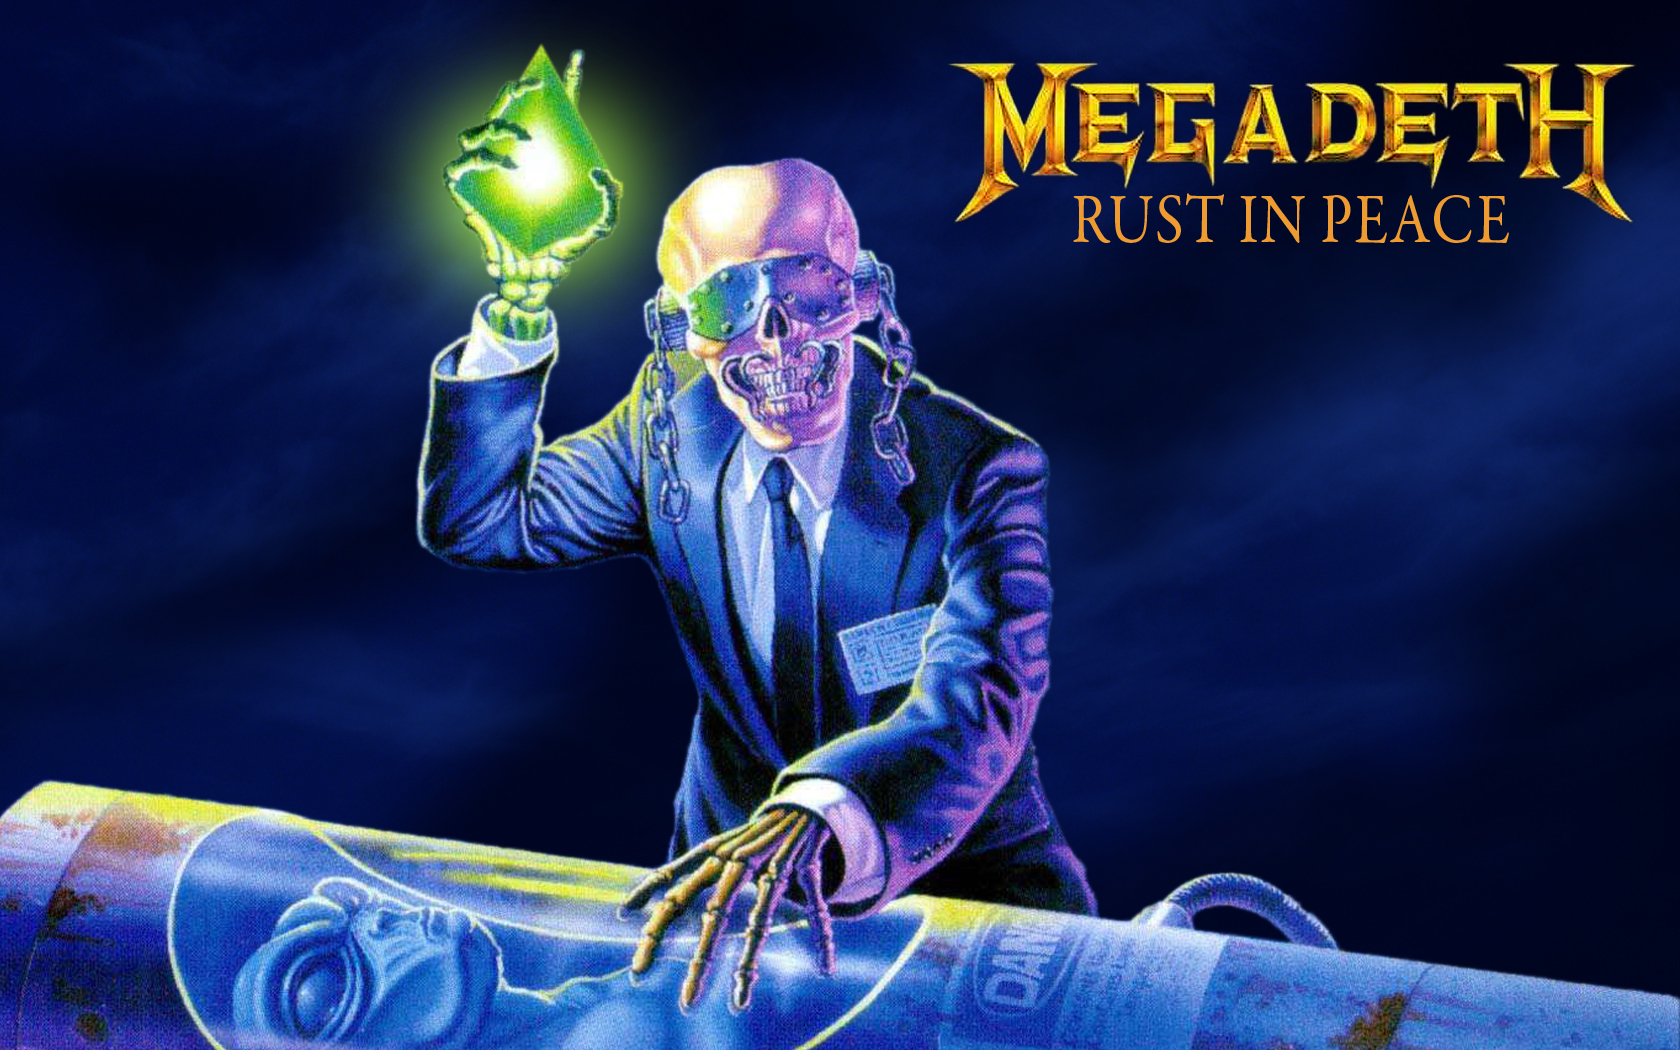 Megadeth Image Rust In Peace Wallpaper Photos